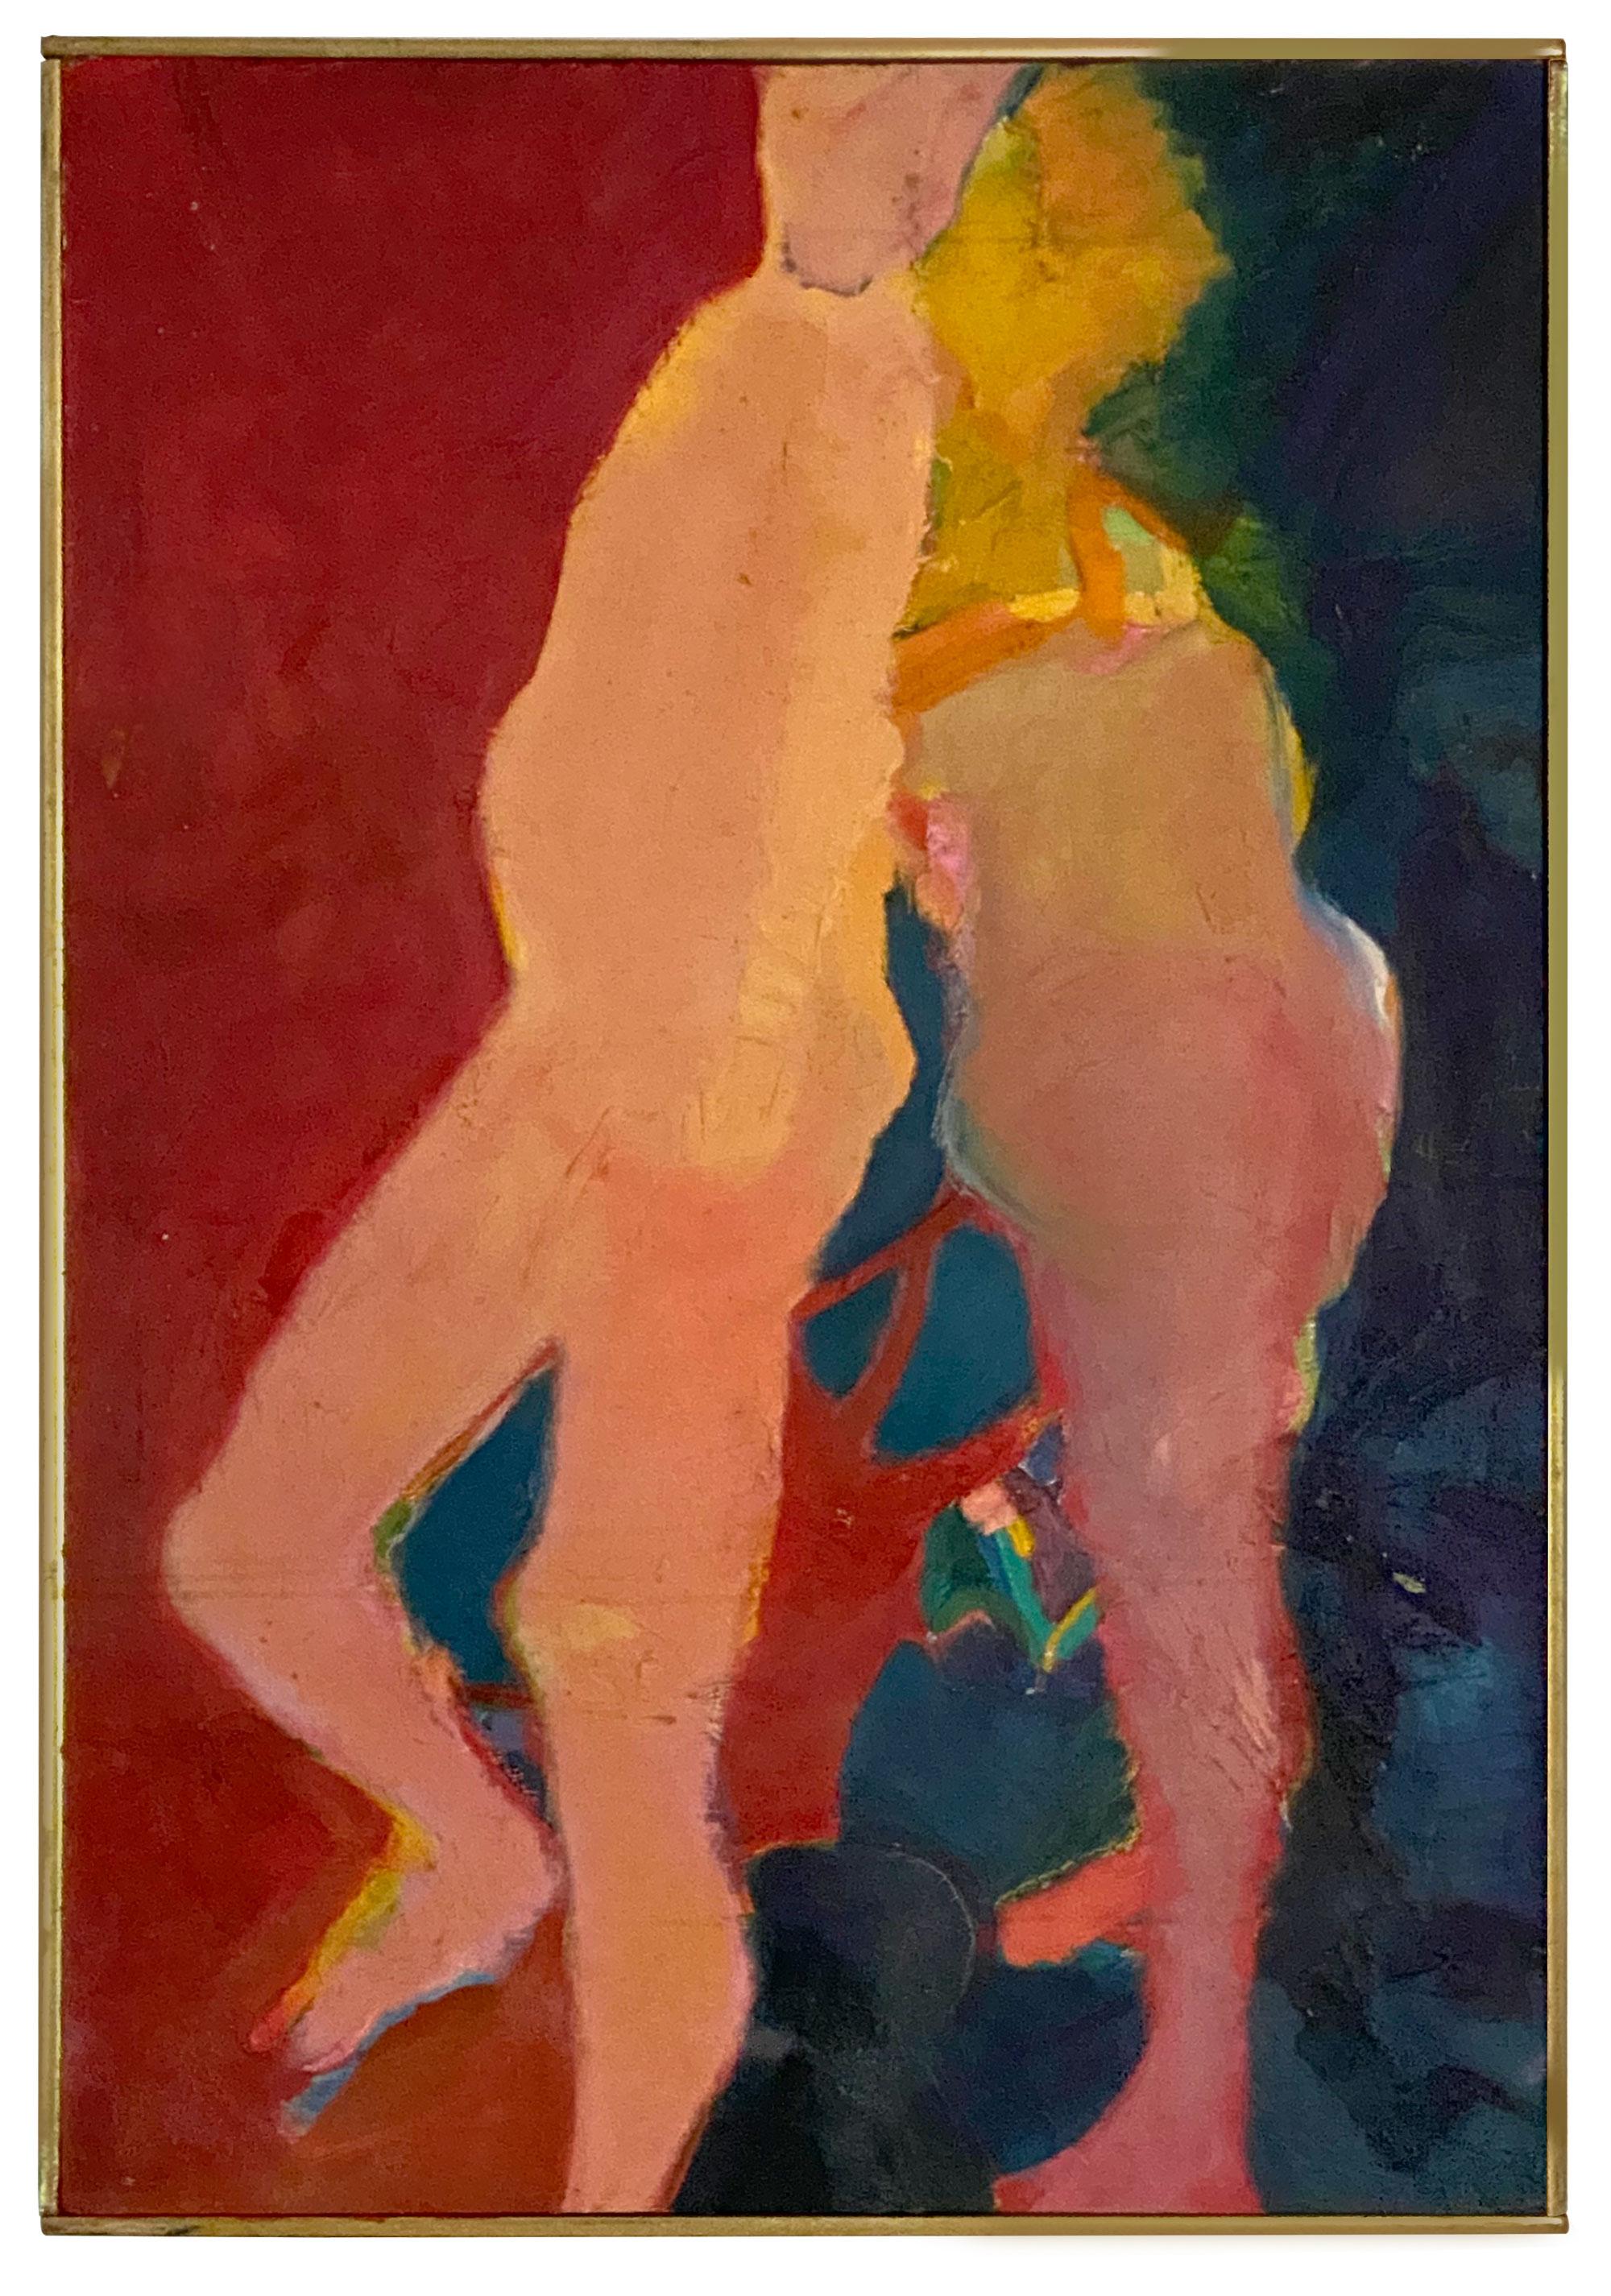 Exquisite figural painting by Mid-Century artist Martin Sumer. Signed verso. Vivid coloration; ethereal in style. Arresting masterpiece.

Martin Sumers (1922 to 2012) was a prolific New York painter and sculptor with a keen focus on the human form.